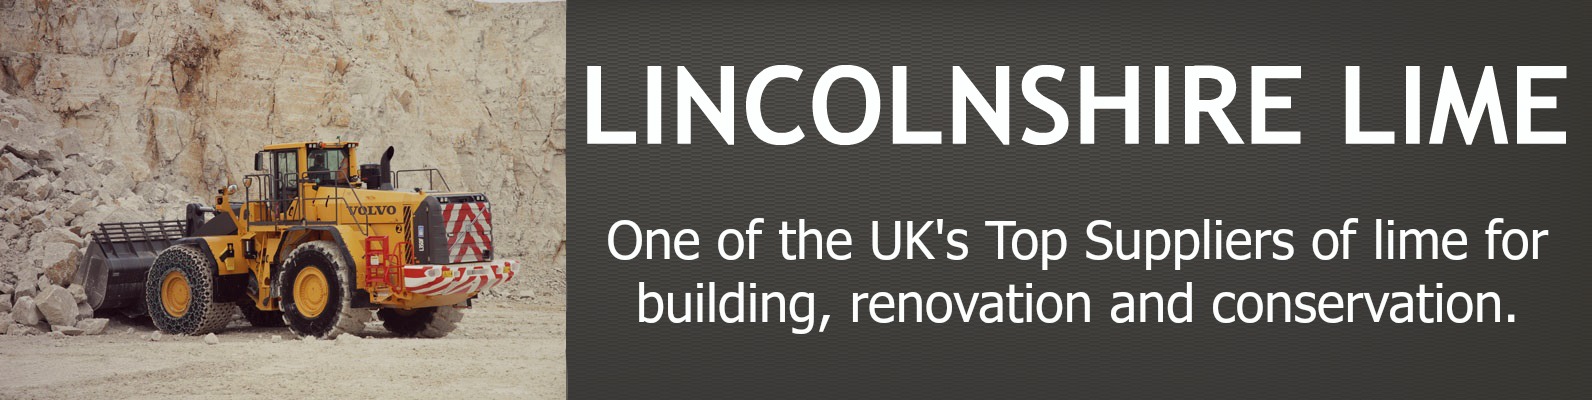 Lincolnshire lime banner, links to the homepage